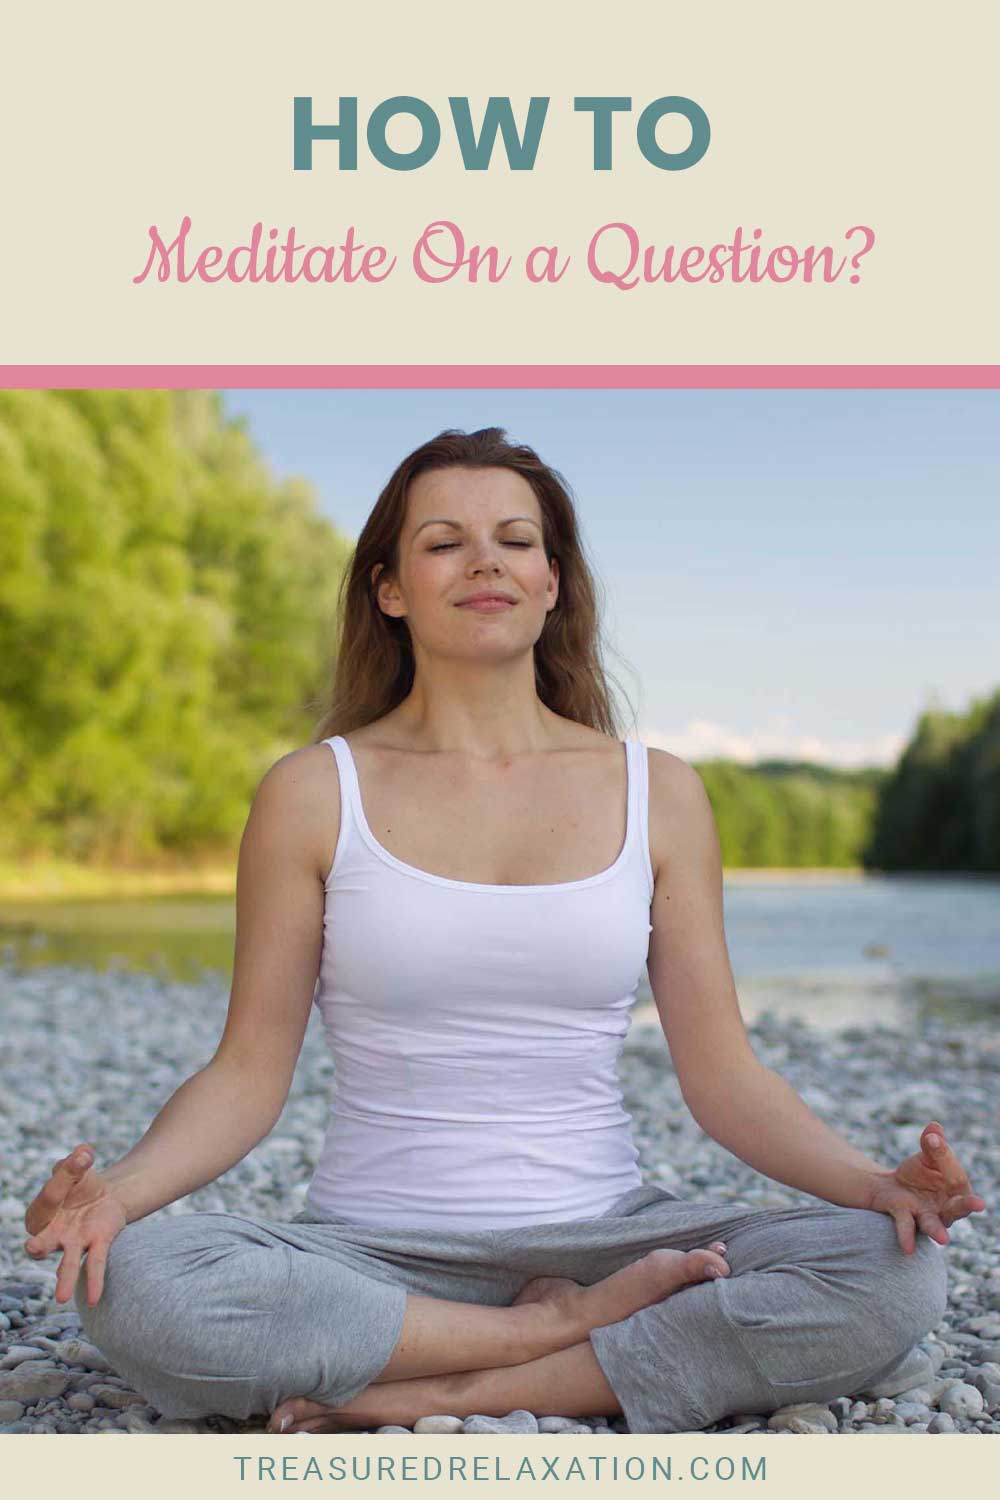 Woman in white tank top and grey pants meditating sitting on rocks - How to Meditate On a Question?